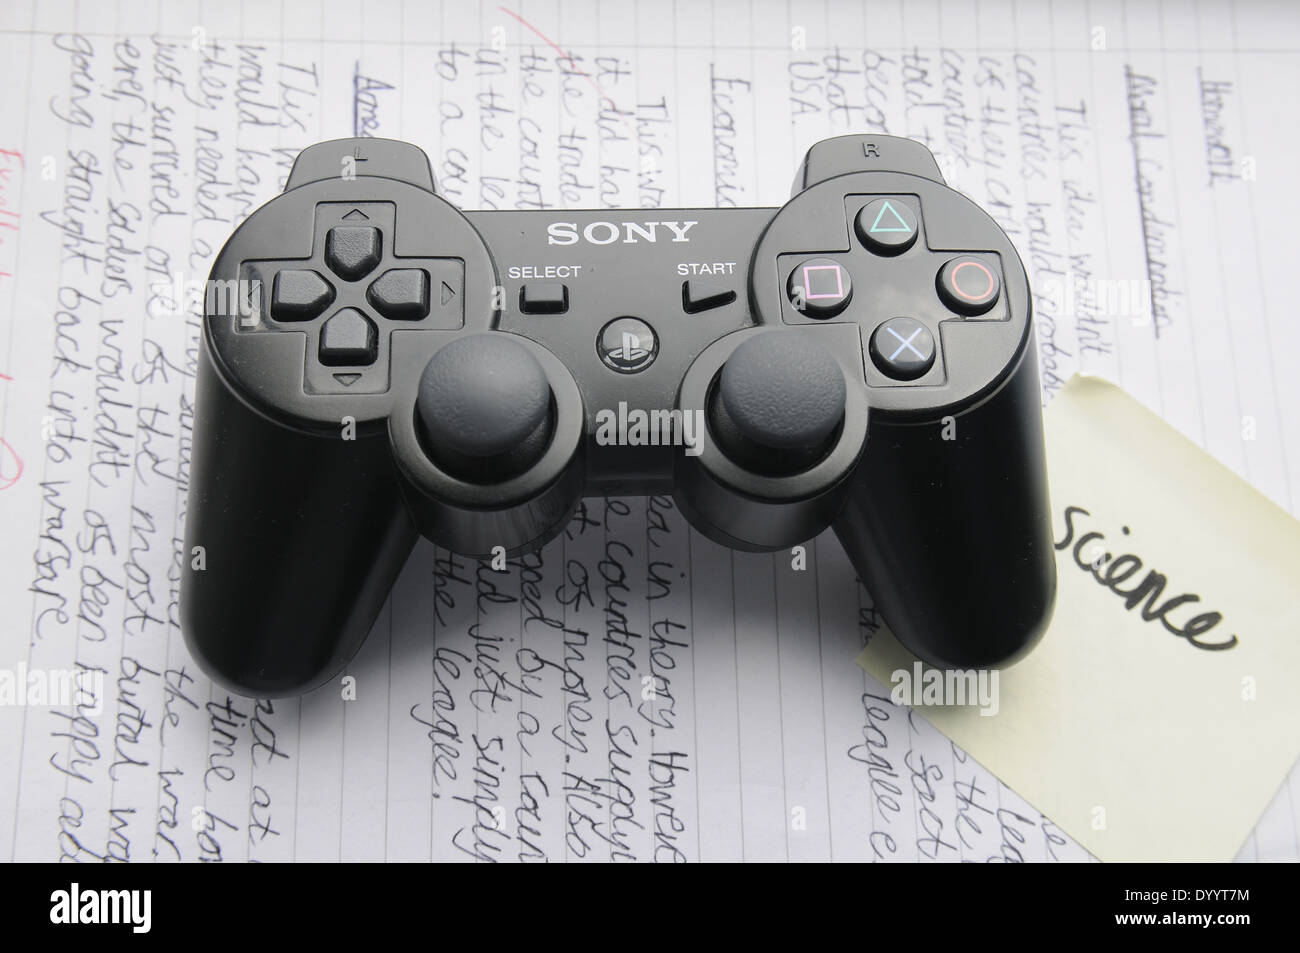 https://c8.alamy.com/comp/DYYT7M/sony-playstation-2-ps2-game-controller-on-a-page-of-homework-DYYT7M.jpg